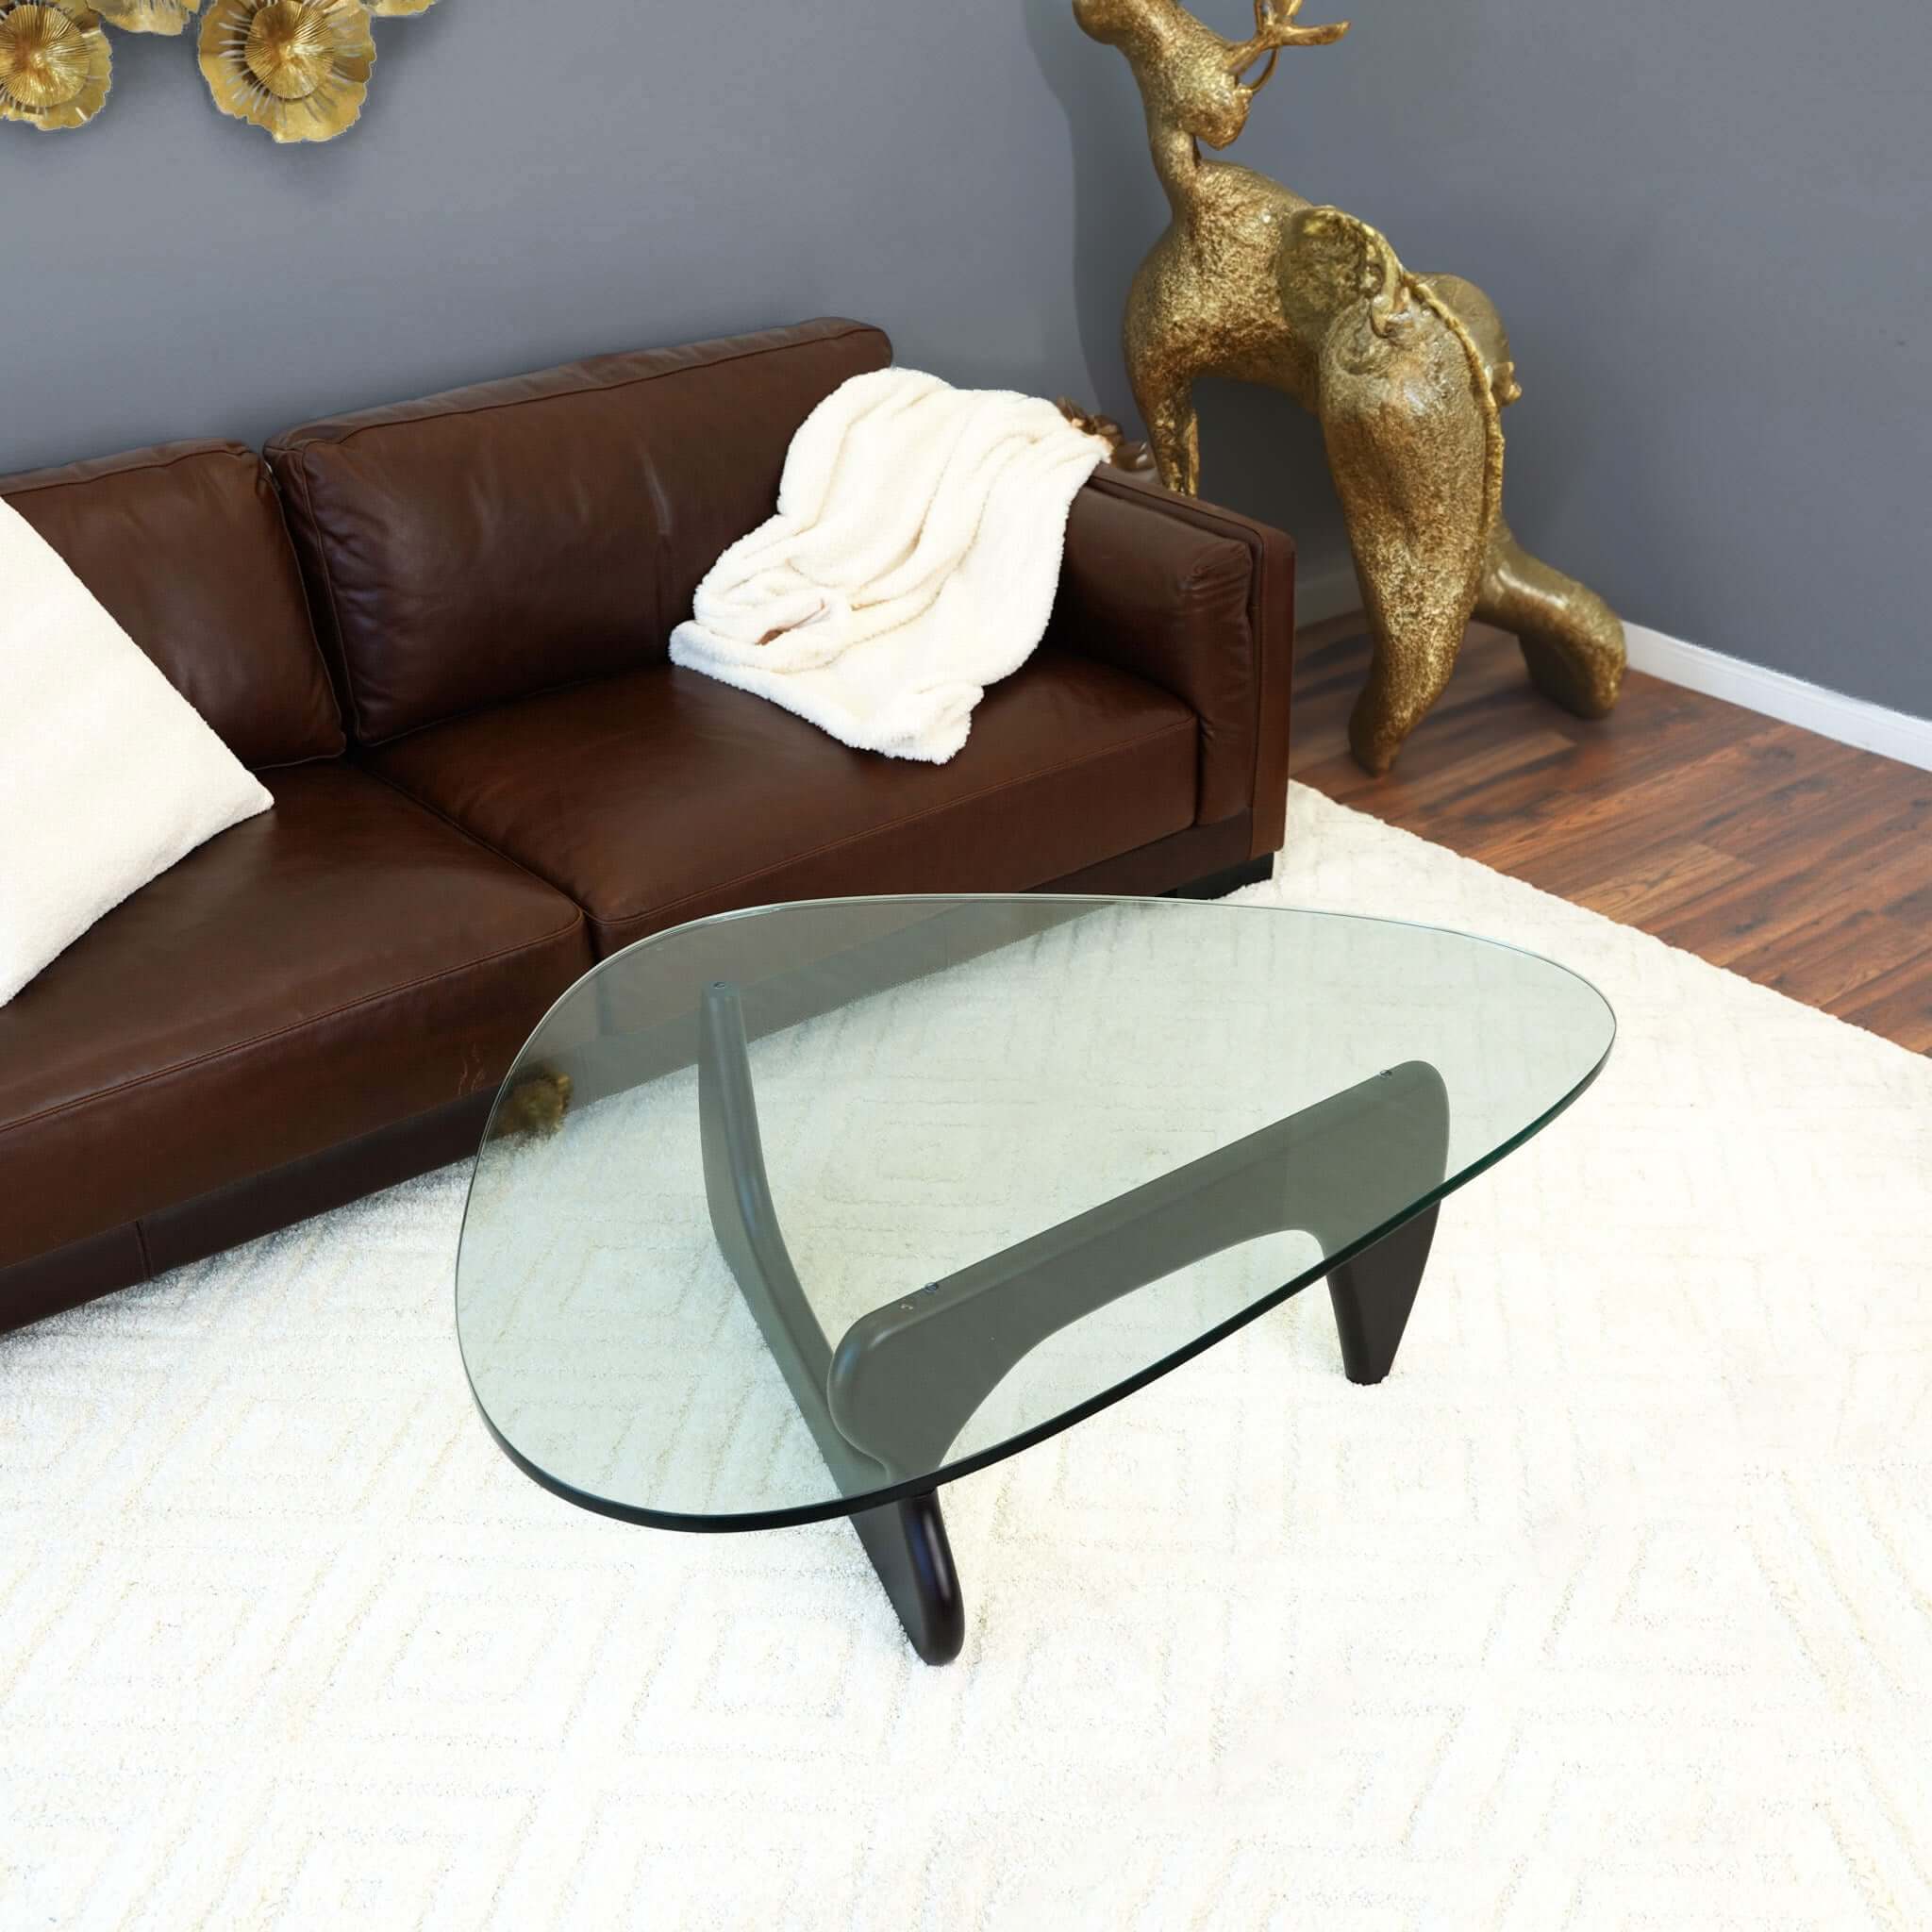 River Glass Coffee Table